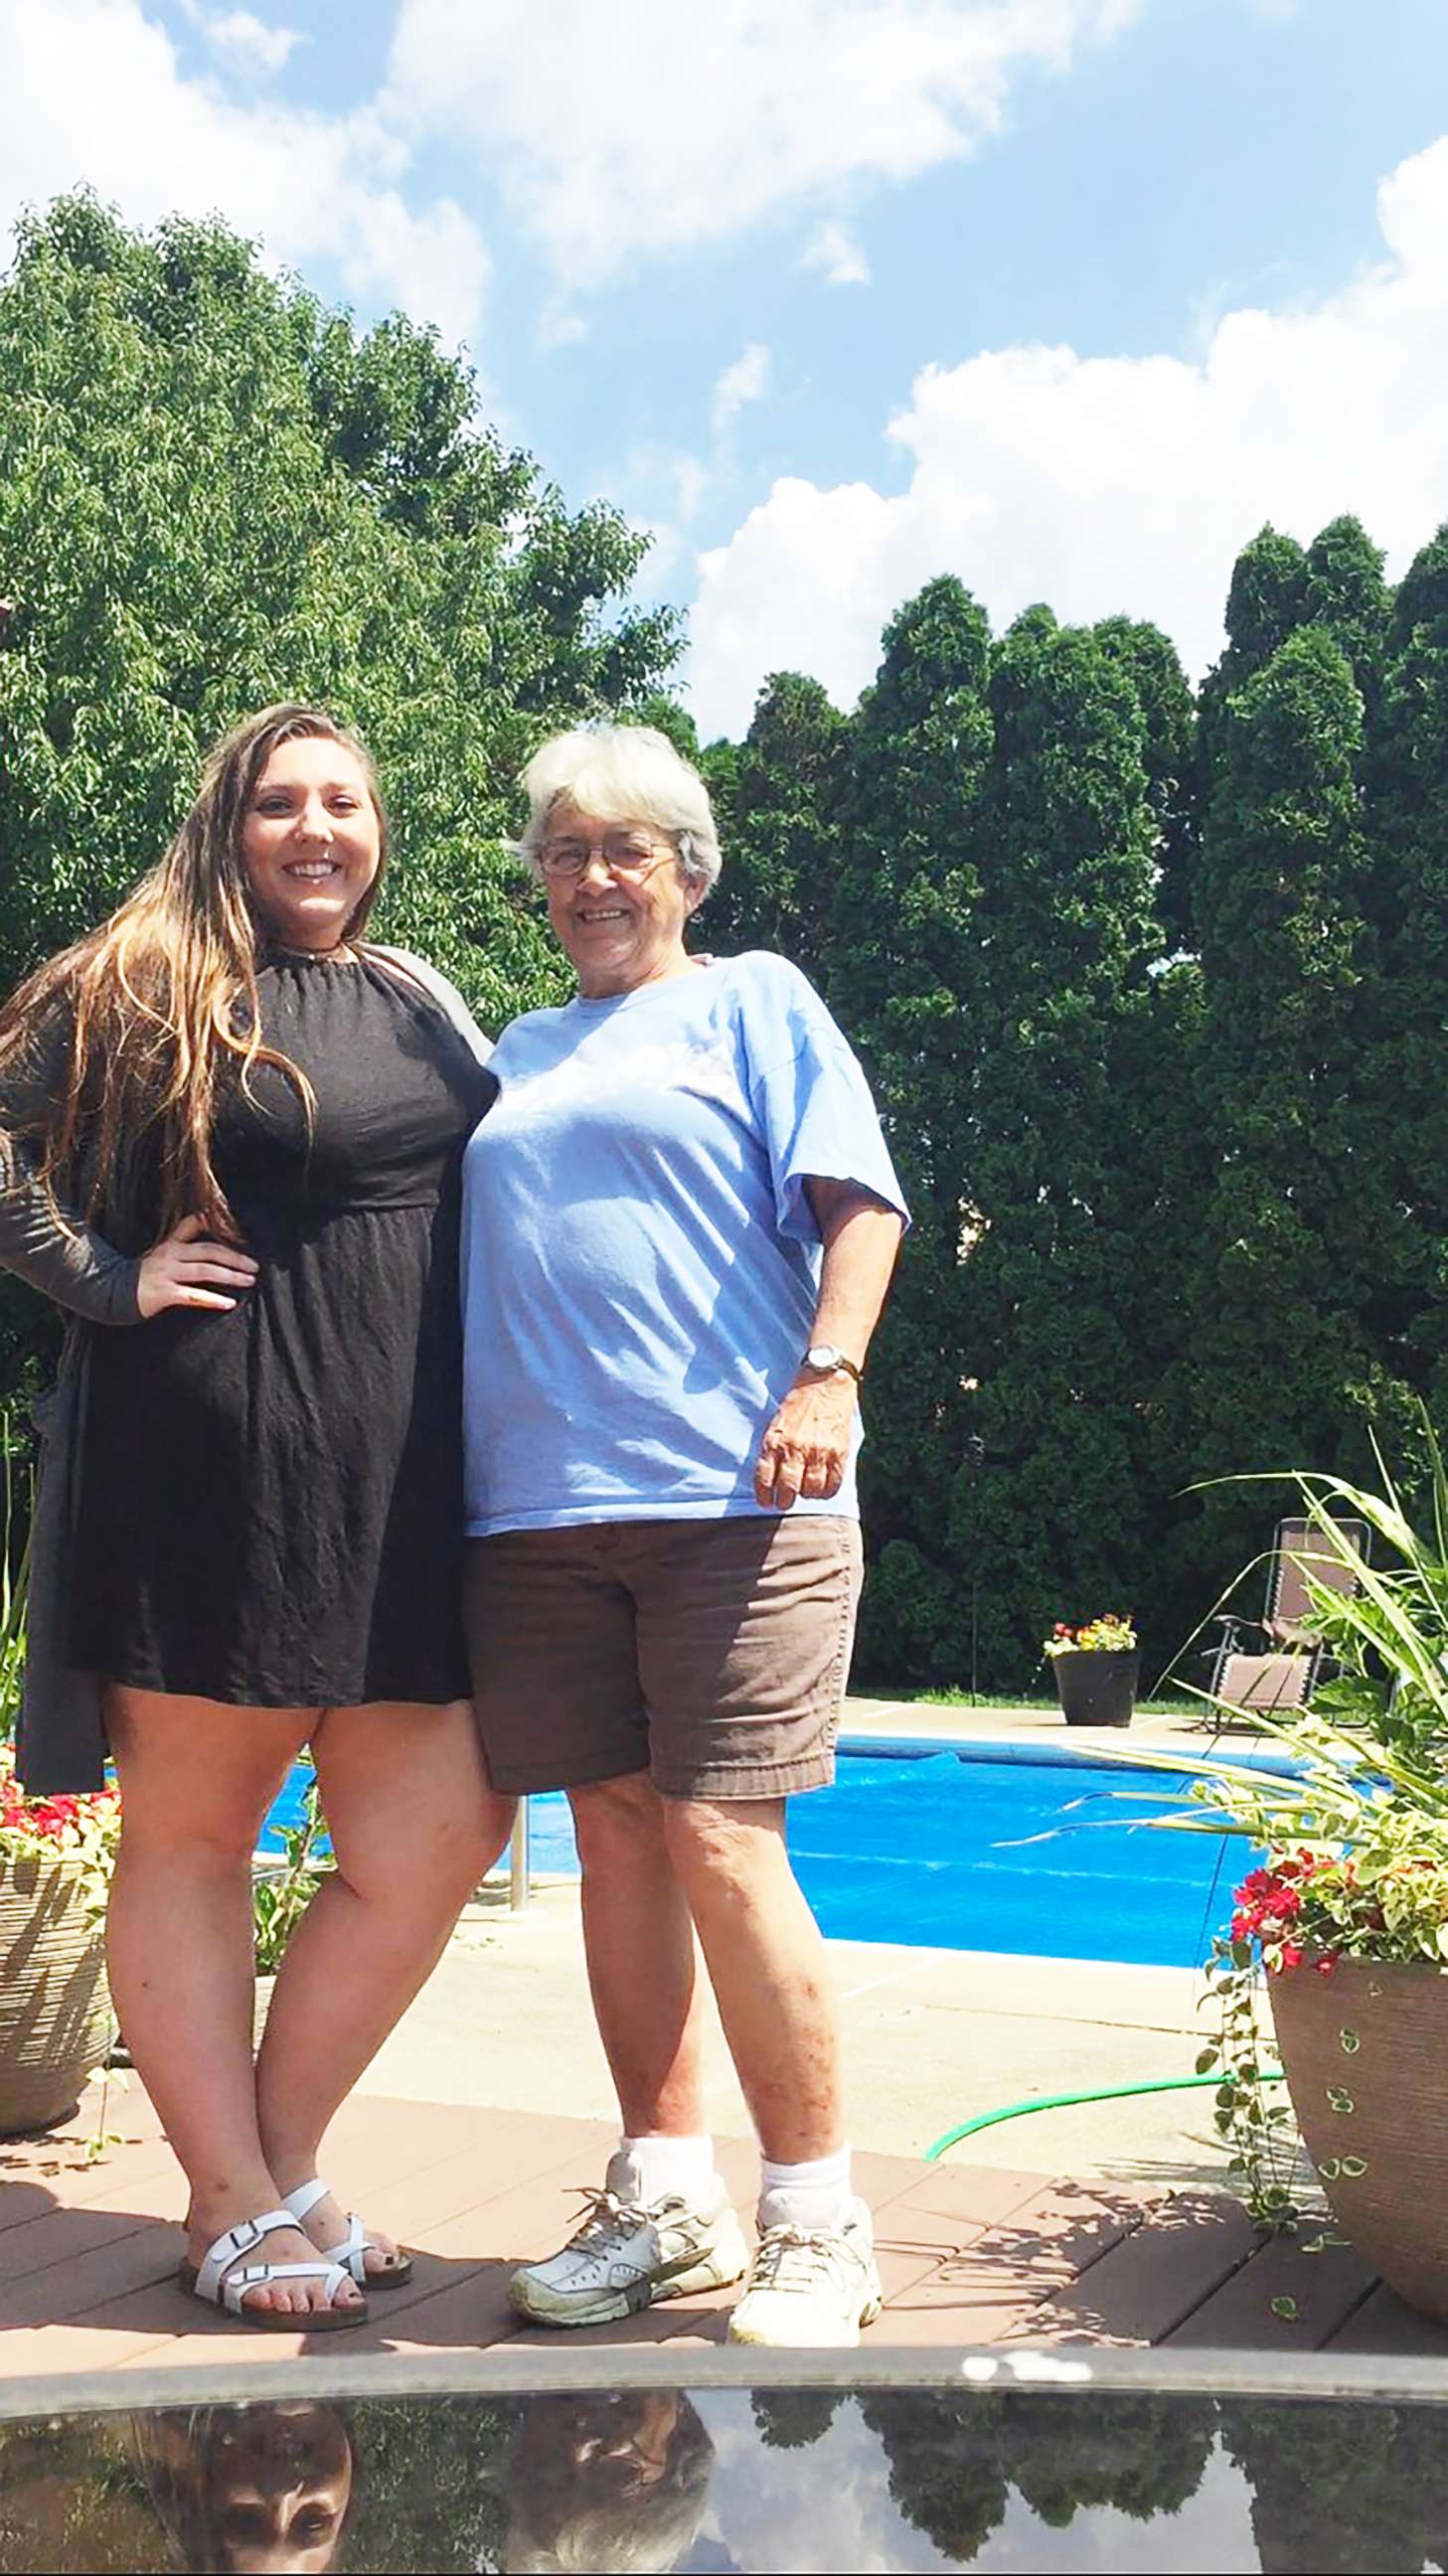 PHOTO: Jenn Miller, 19, and her grandmother, Susan Grey, 70, will wear identical dresses to a family wedding in September.